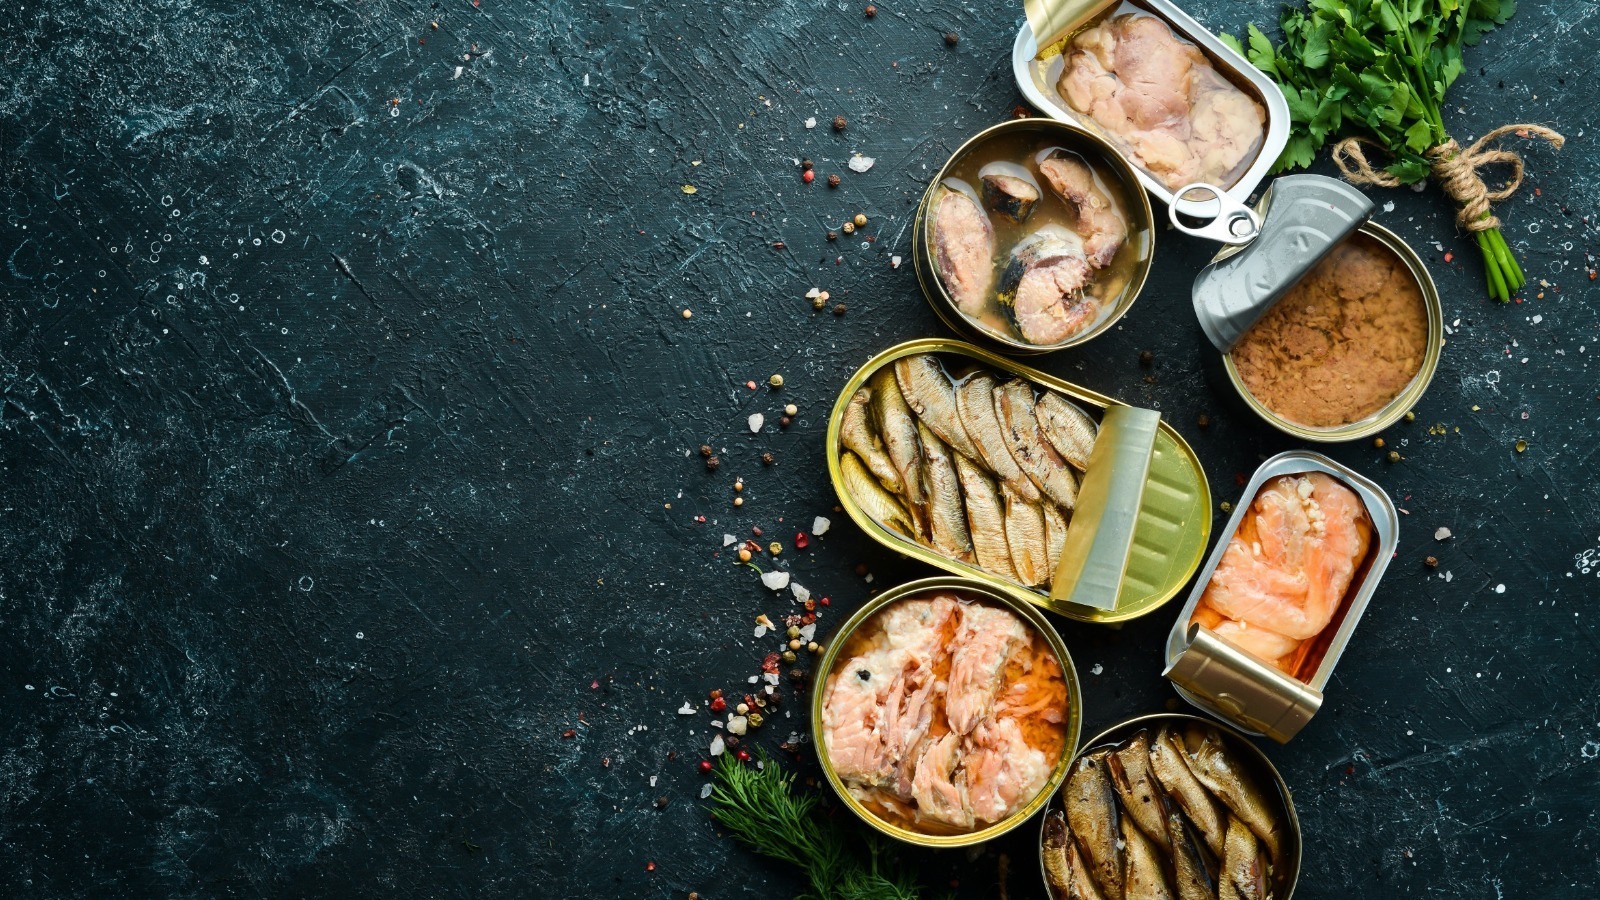 15 Ways To Use Canned Seafood To Improve Your Cooking